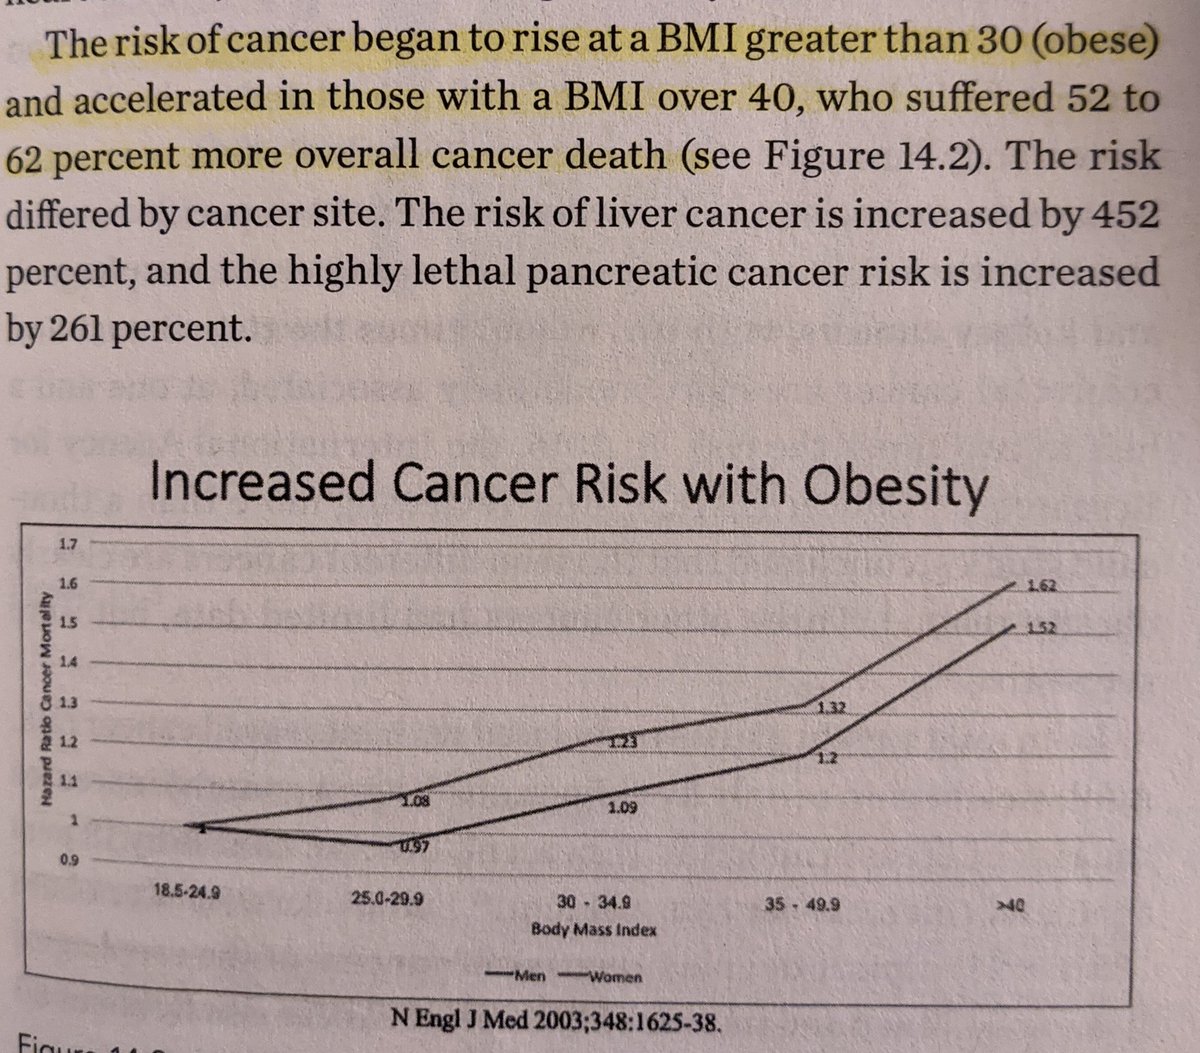 "Our steady progress against many cancers is being significantly impeded by the obesity epidemic" $KO  $MCD = Cancer Stocks just like  $MOObviously the inverse is helpful = fast